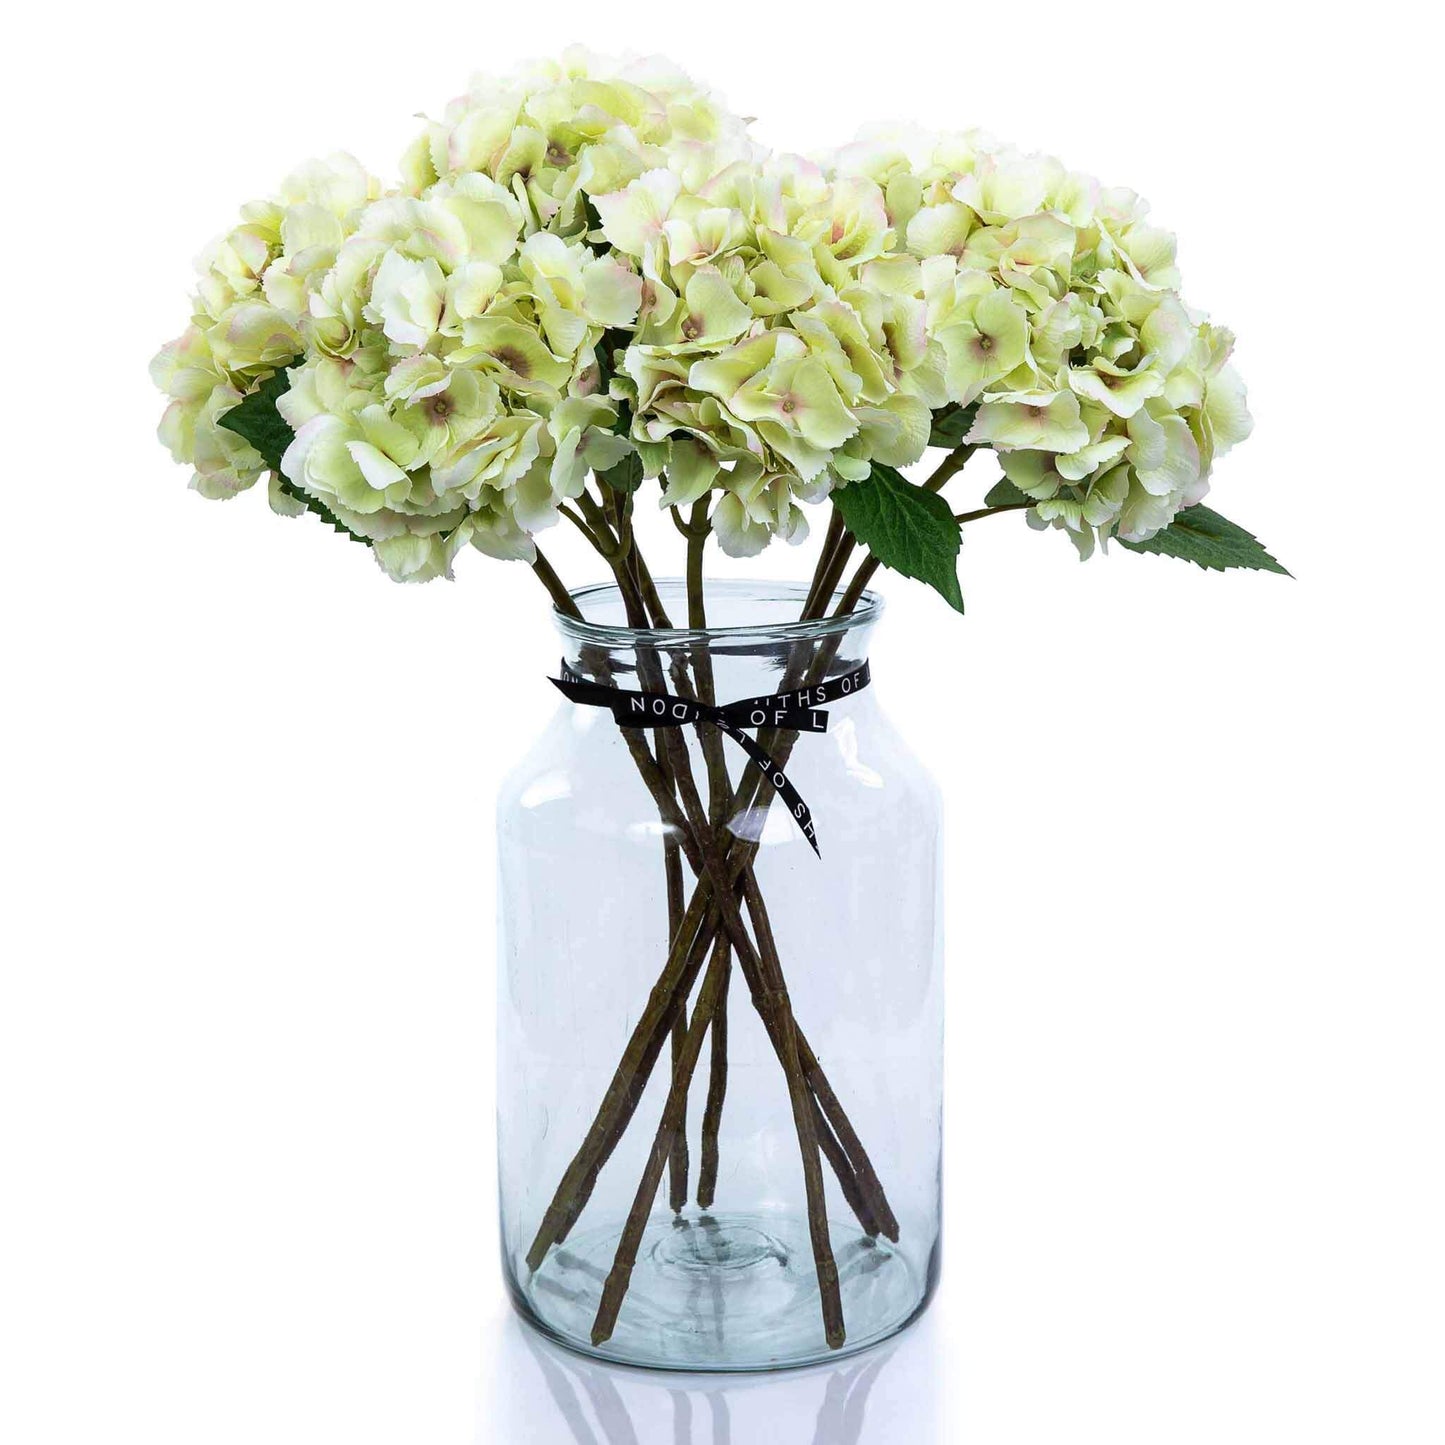 Large green faux hydrangea bouquet in apothecary vase